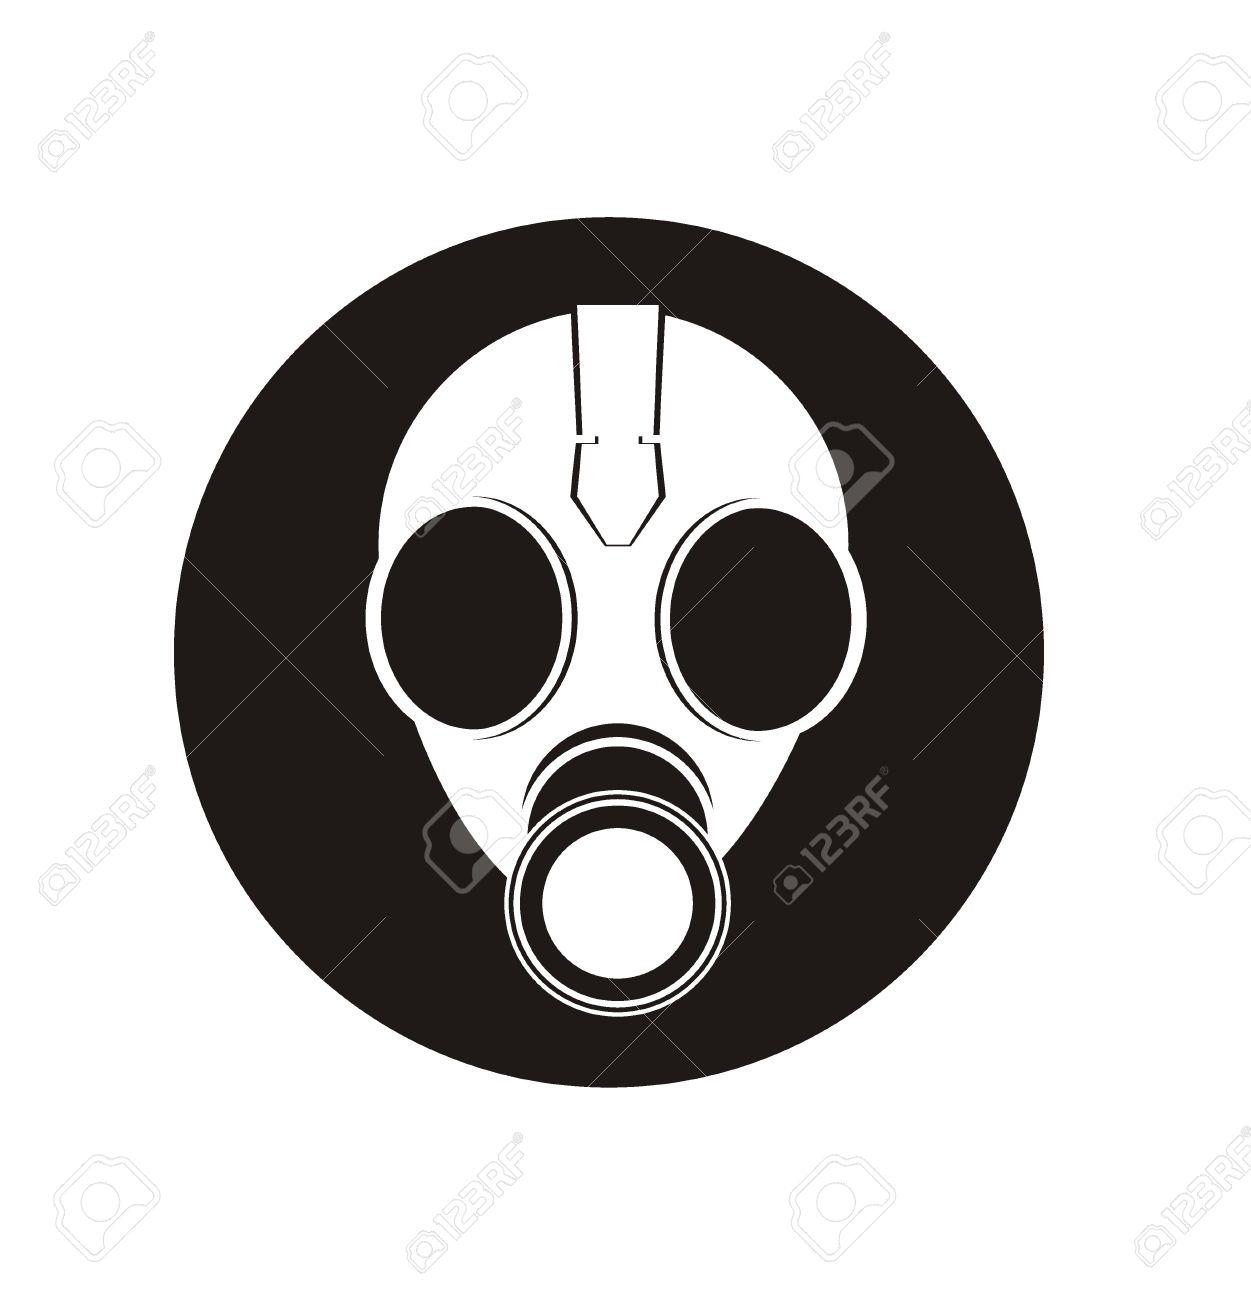 gas clipart simple